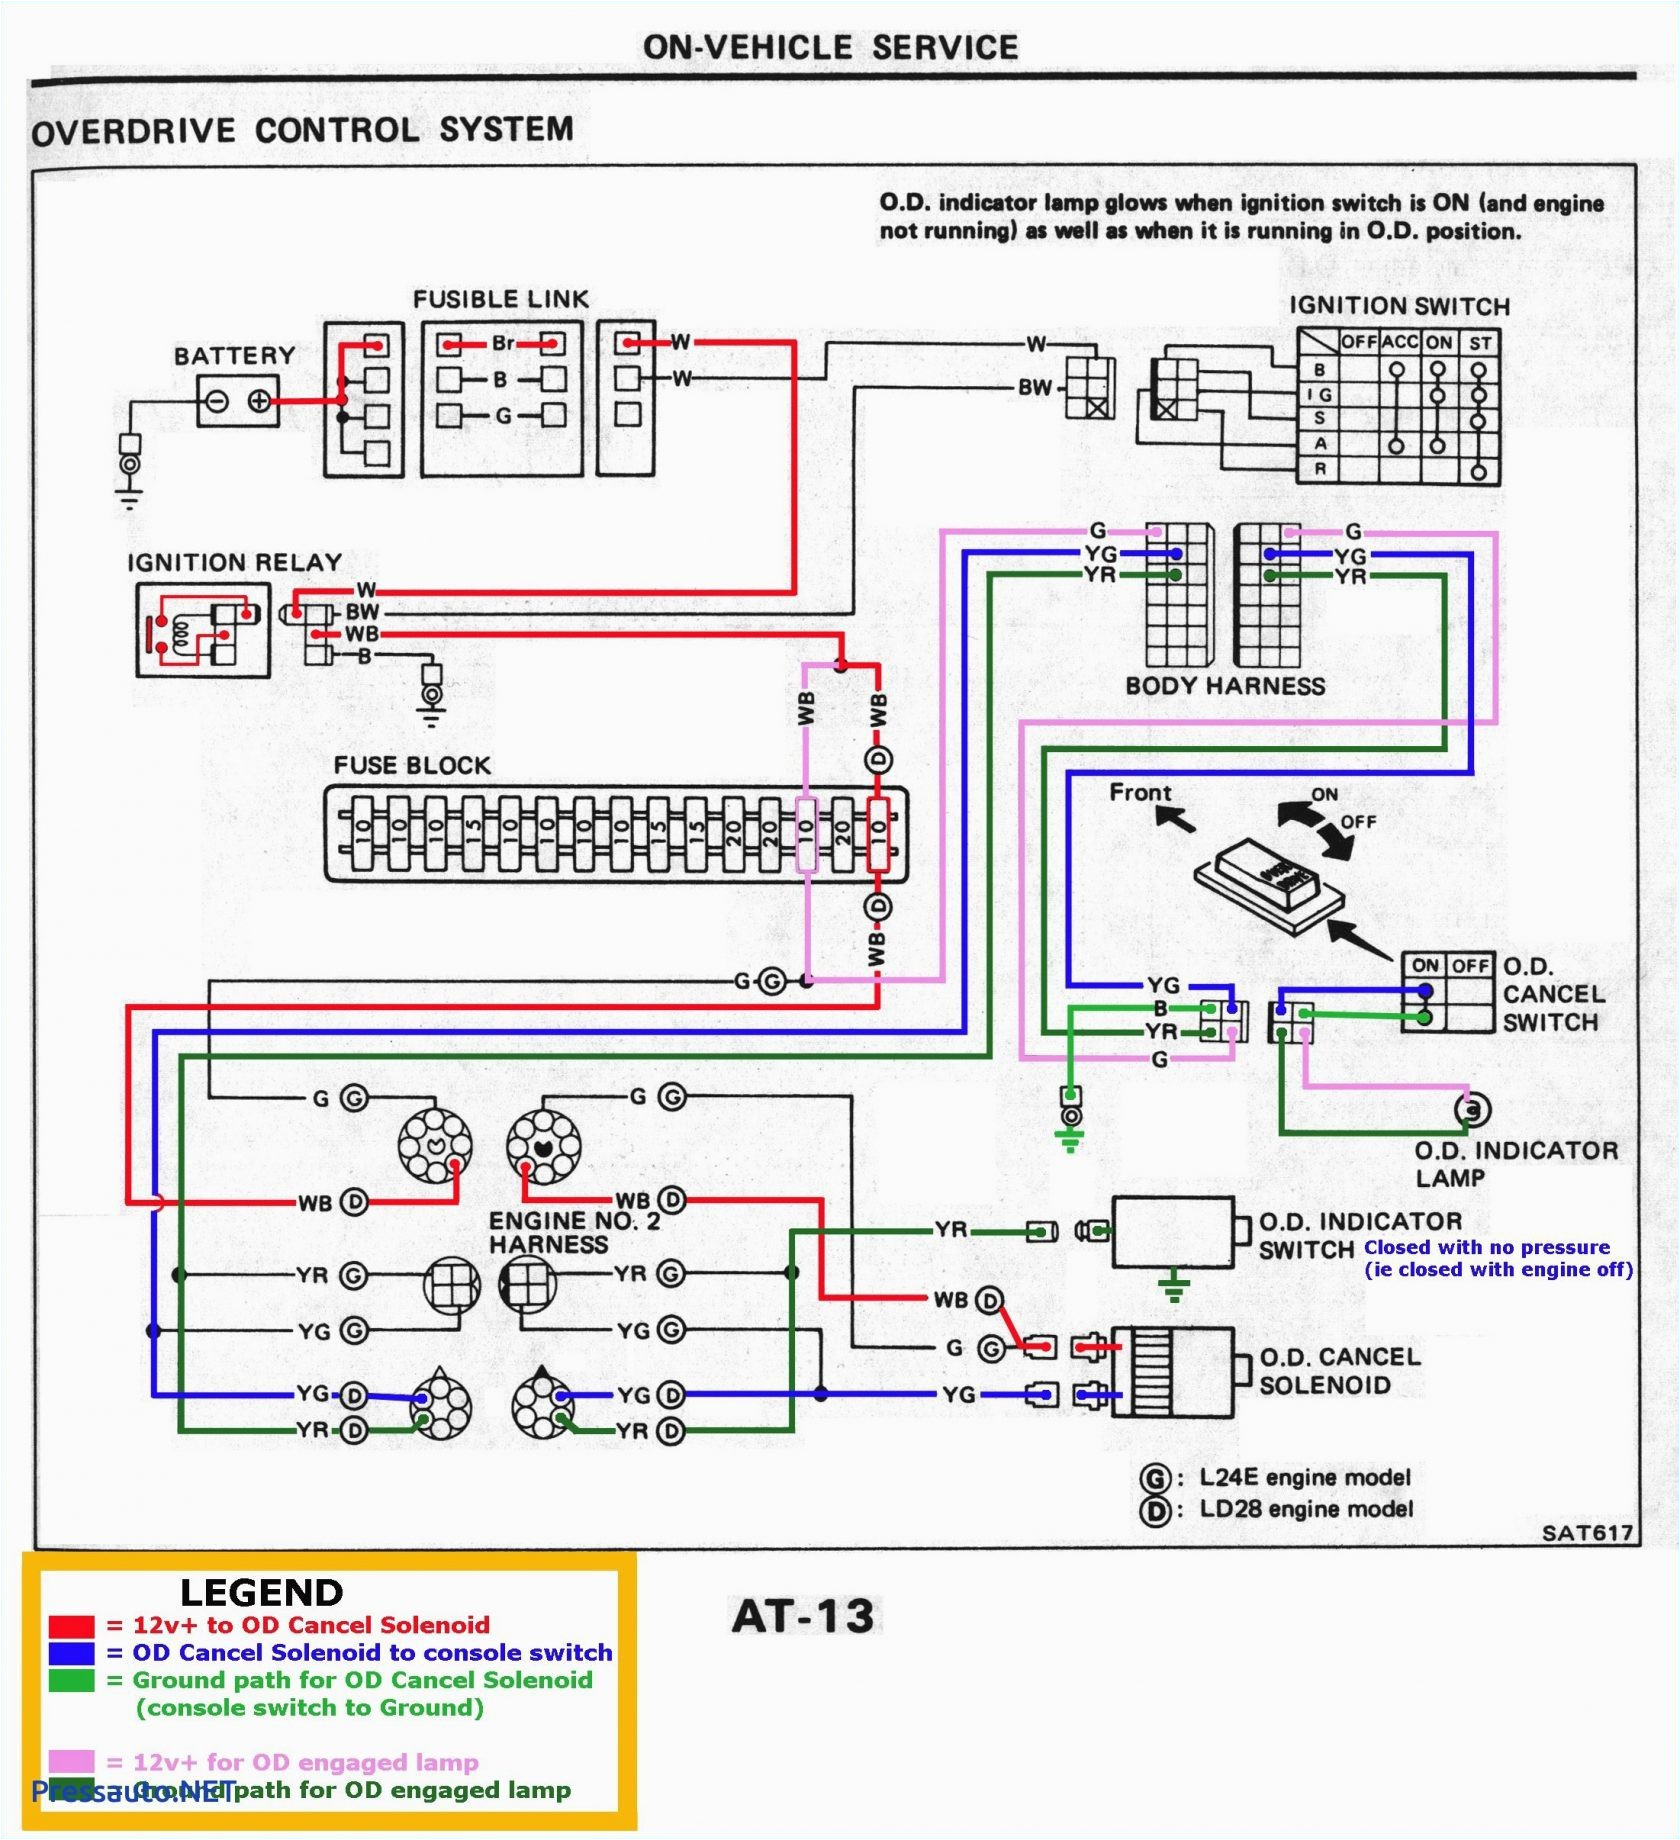 2002 chevy tahoe ac system diagram fuel pump relay location 2005 wiring diagram likewise ford taurus fan volvo relay wiring besides